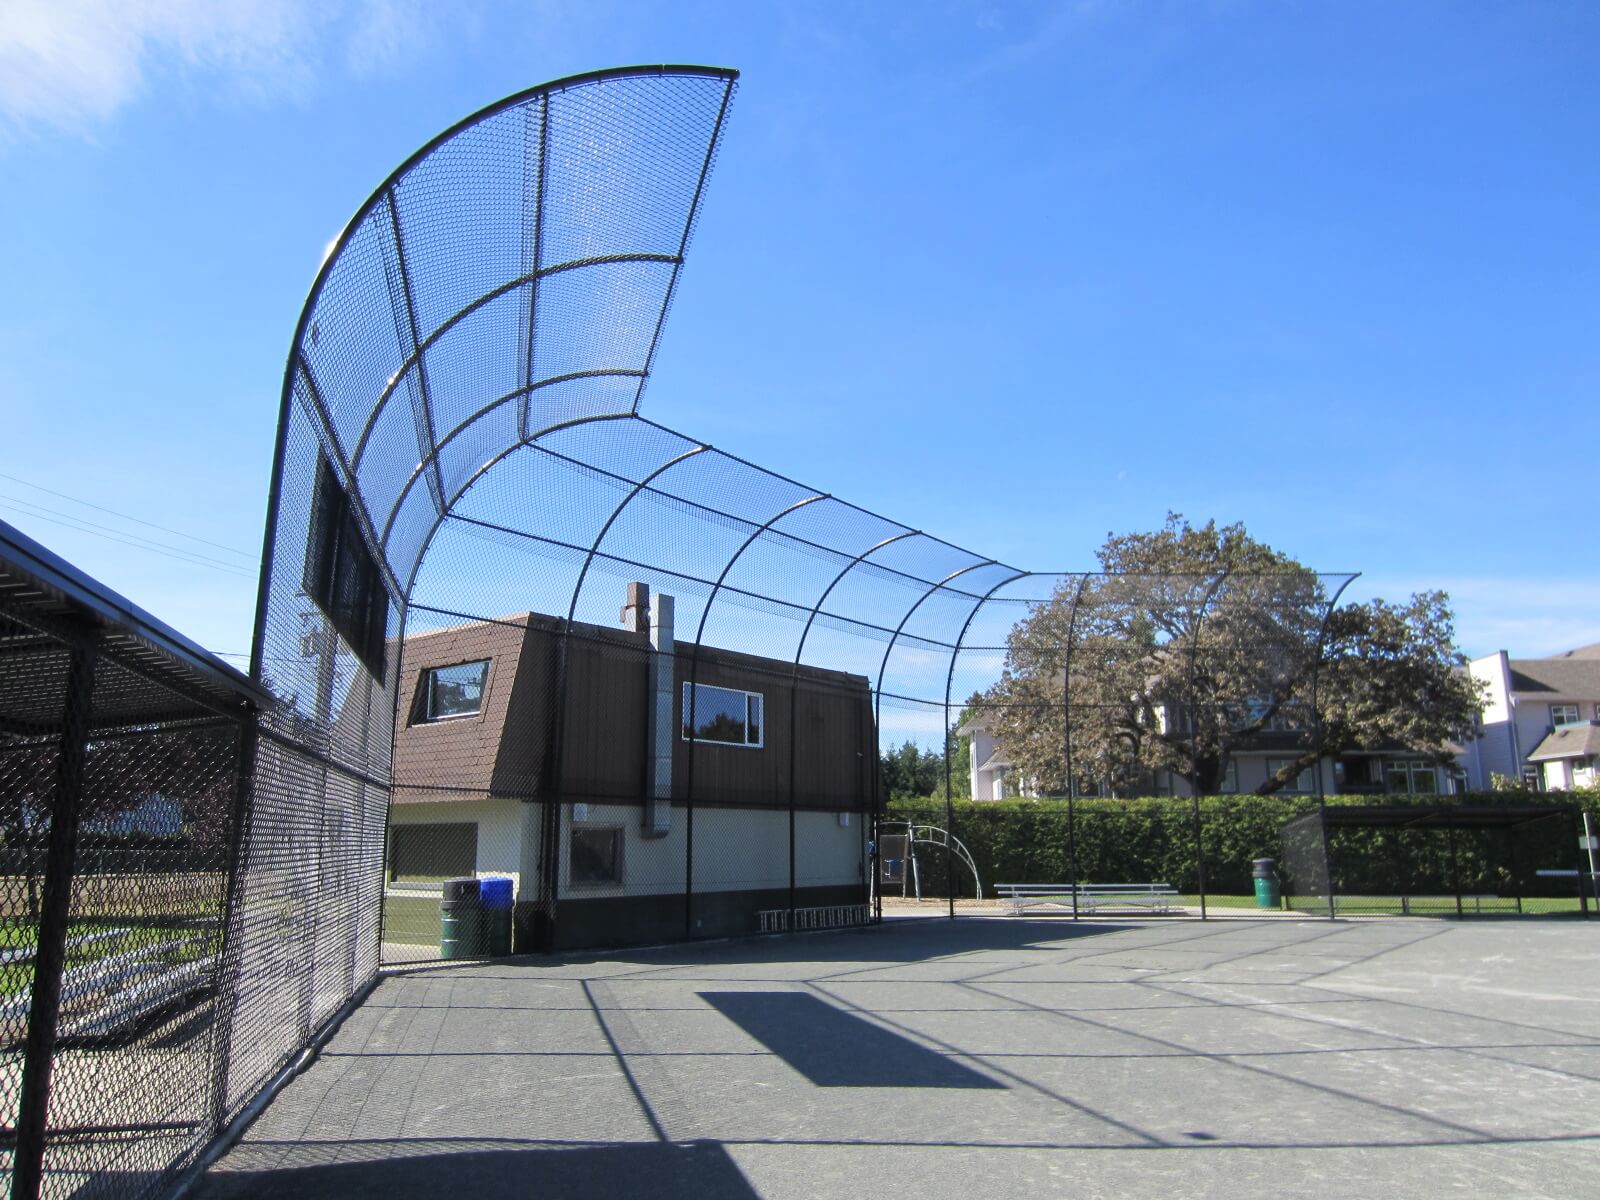 The Versatility and Durability of Chainlink Fences